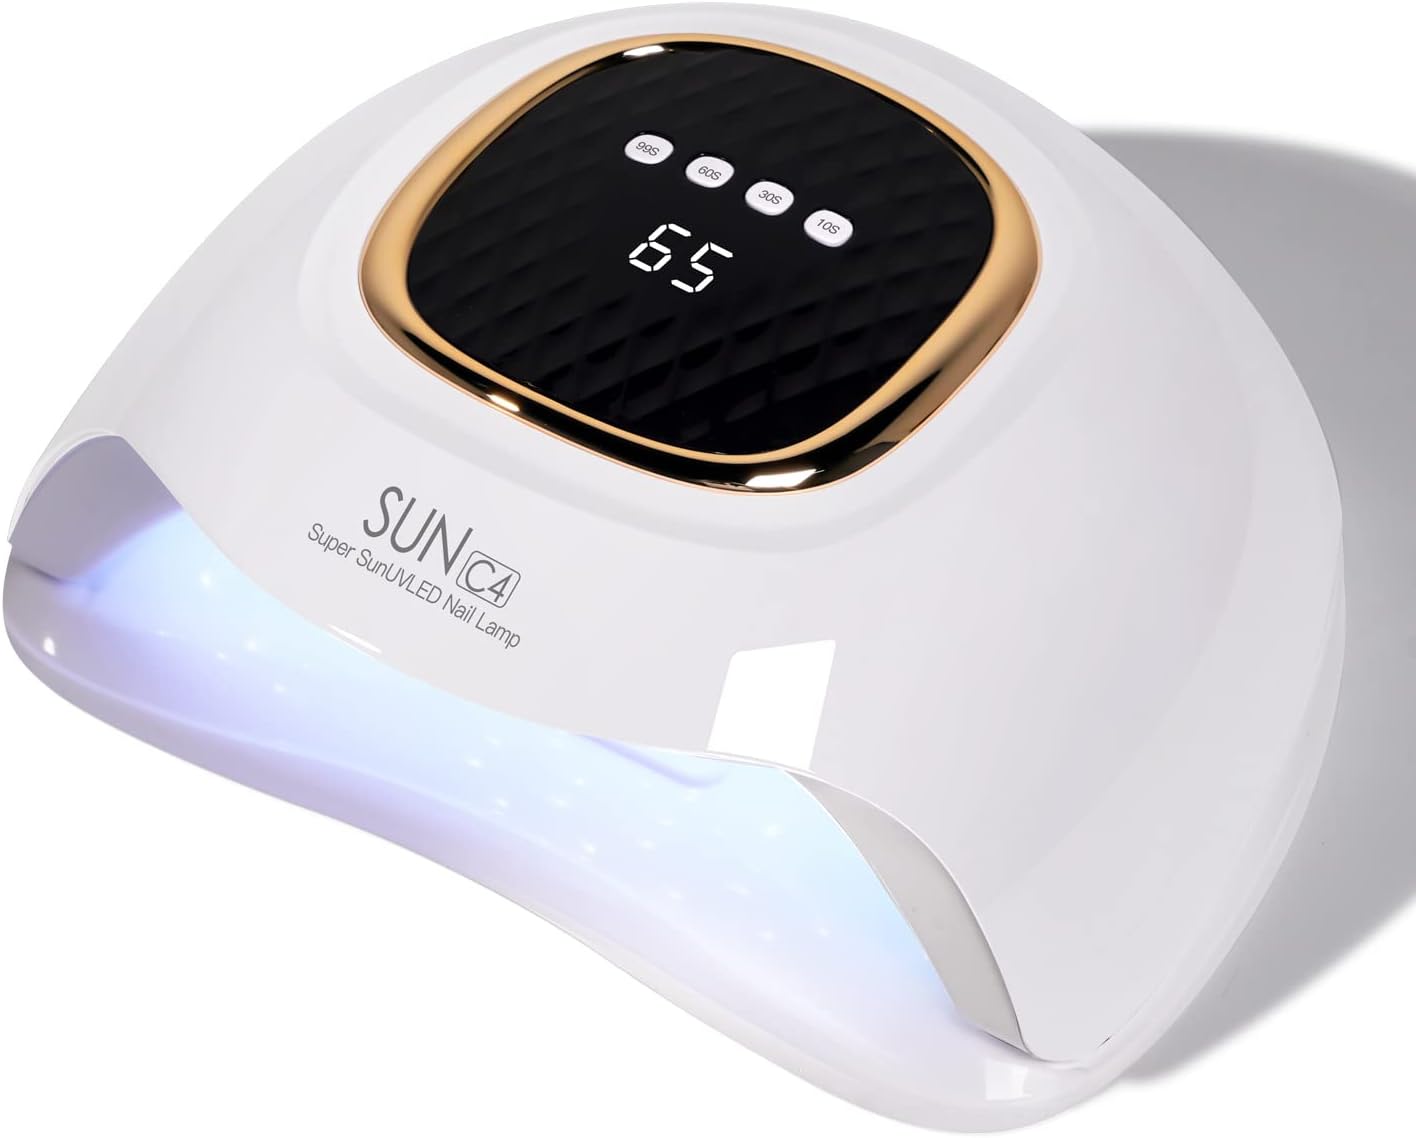 288W Professional Led Nail Curing Lamps with Automatic Sensor/4 Timer Setting for Home & Salon